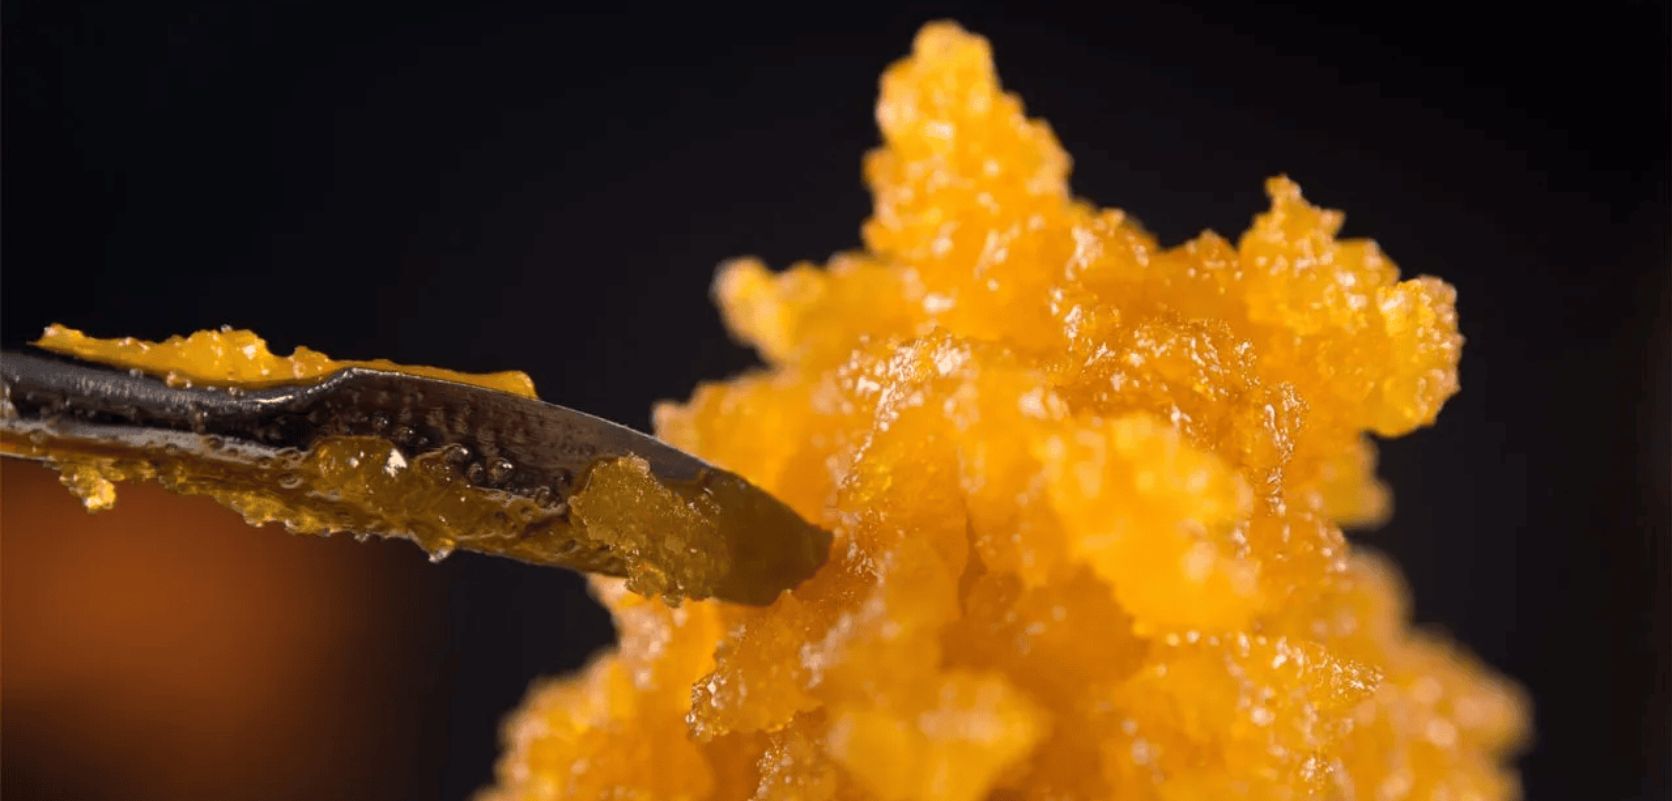 So, in the world of magical golden potions, living resin is the invitation to a fantastic cannabis adventure.